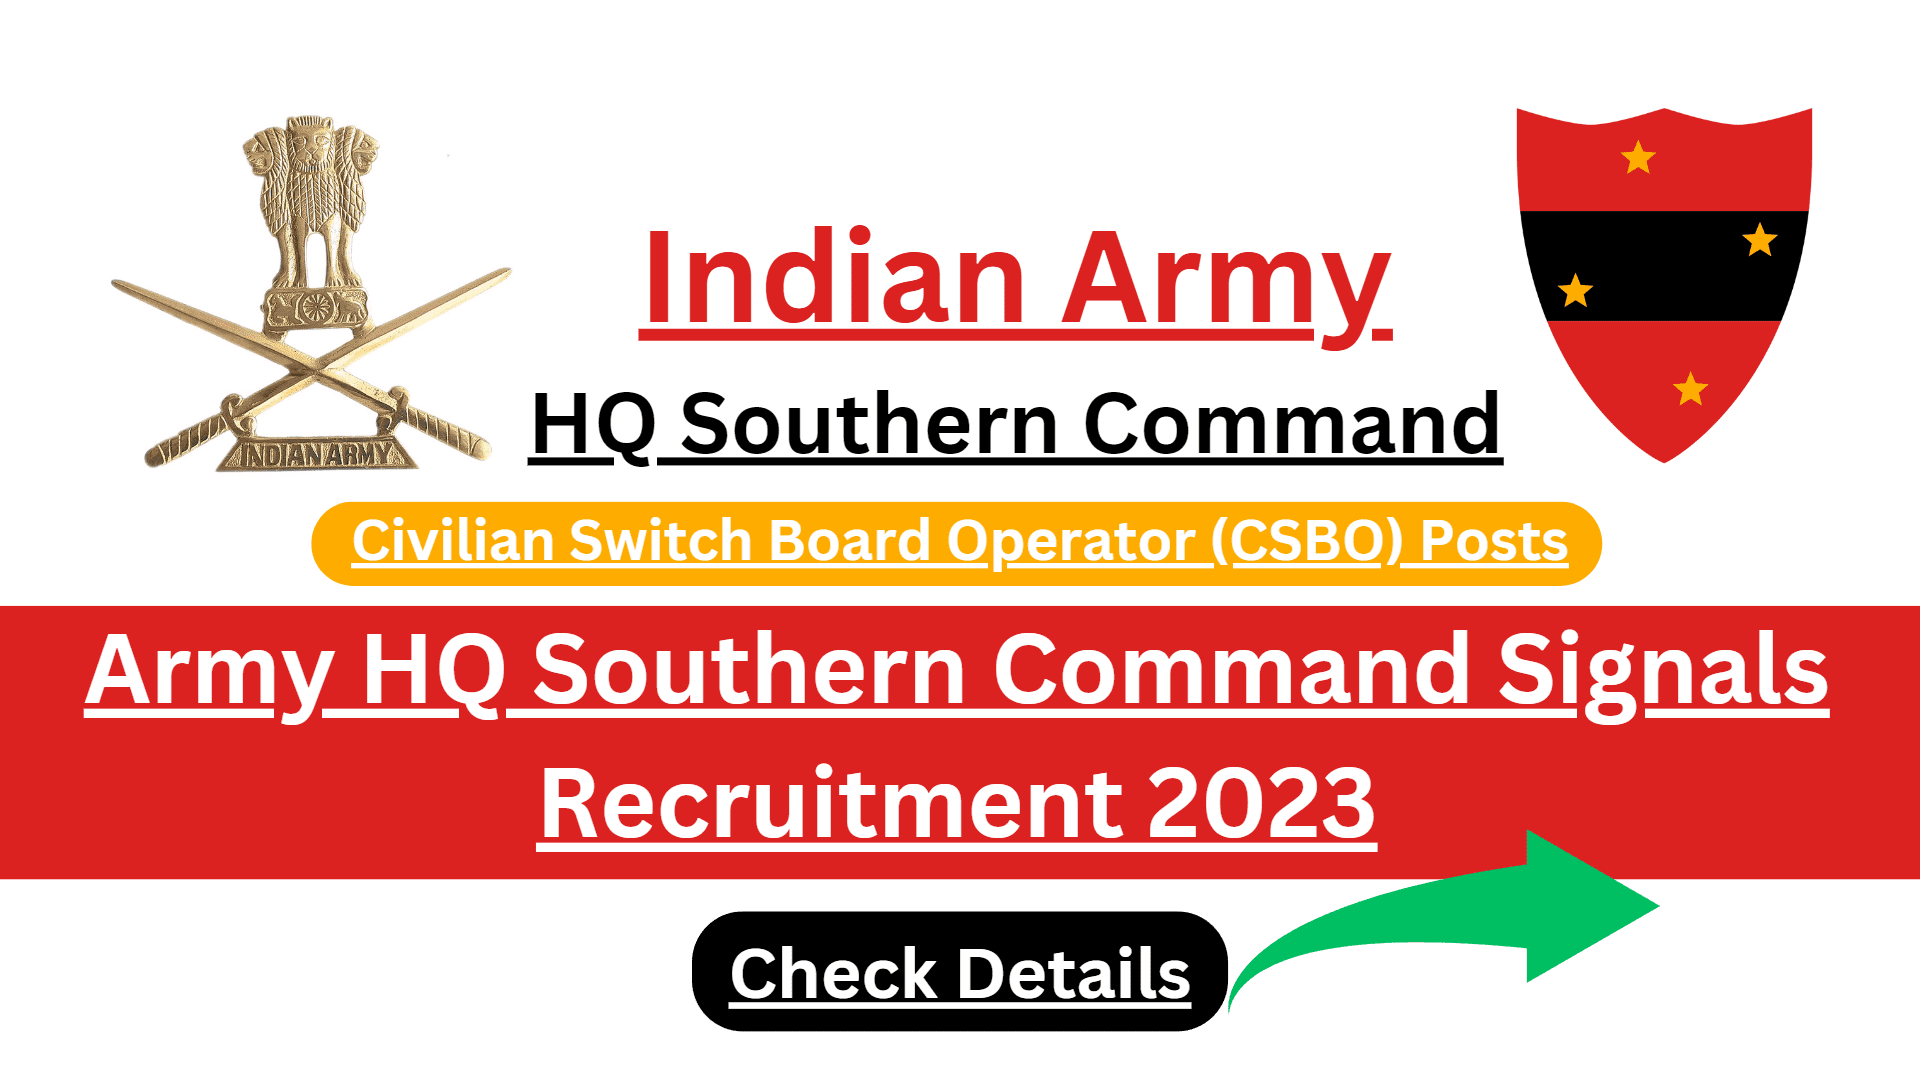 Army HQ Southern Command Signals CSBO Recruitment 2023